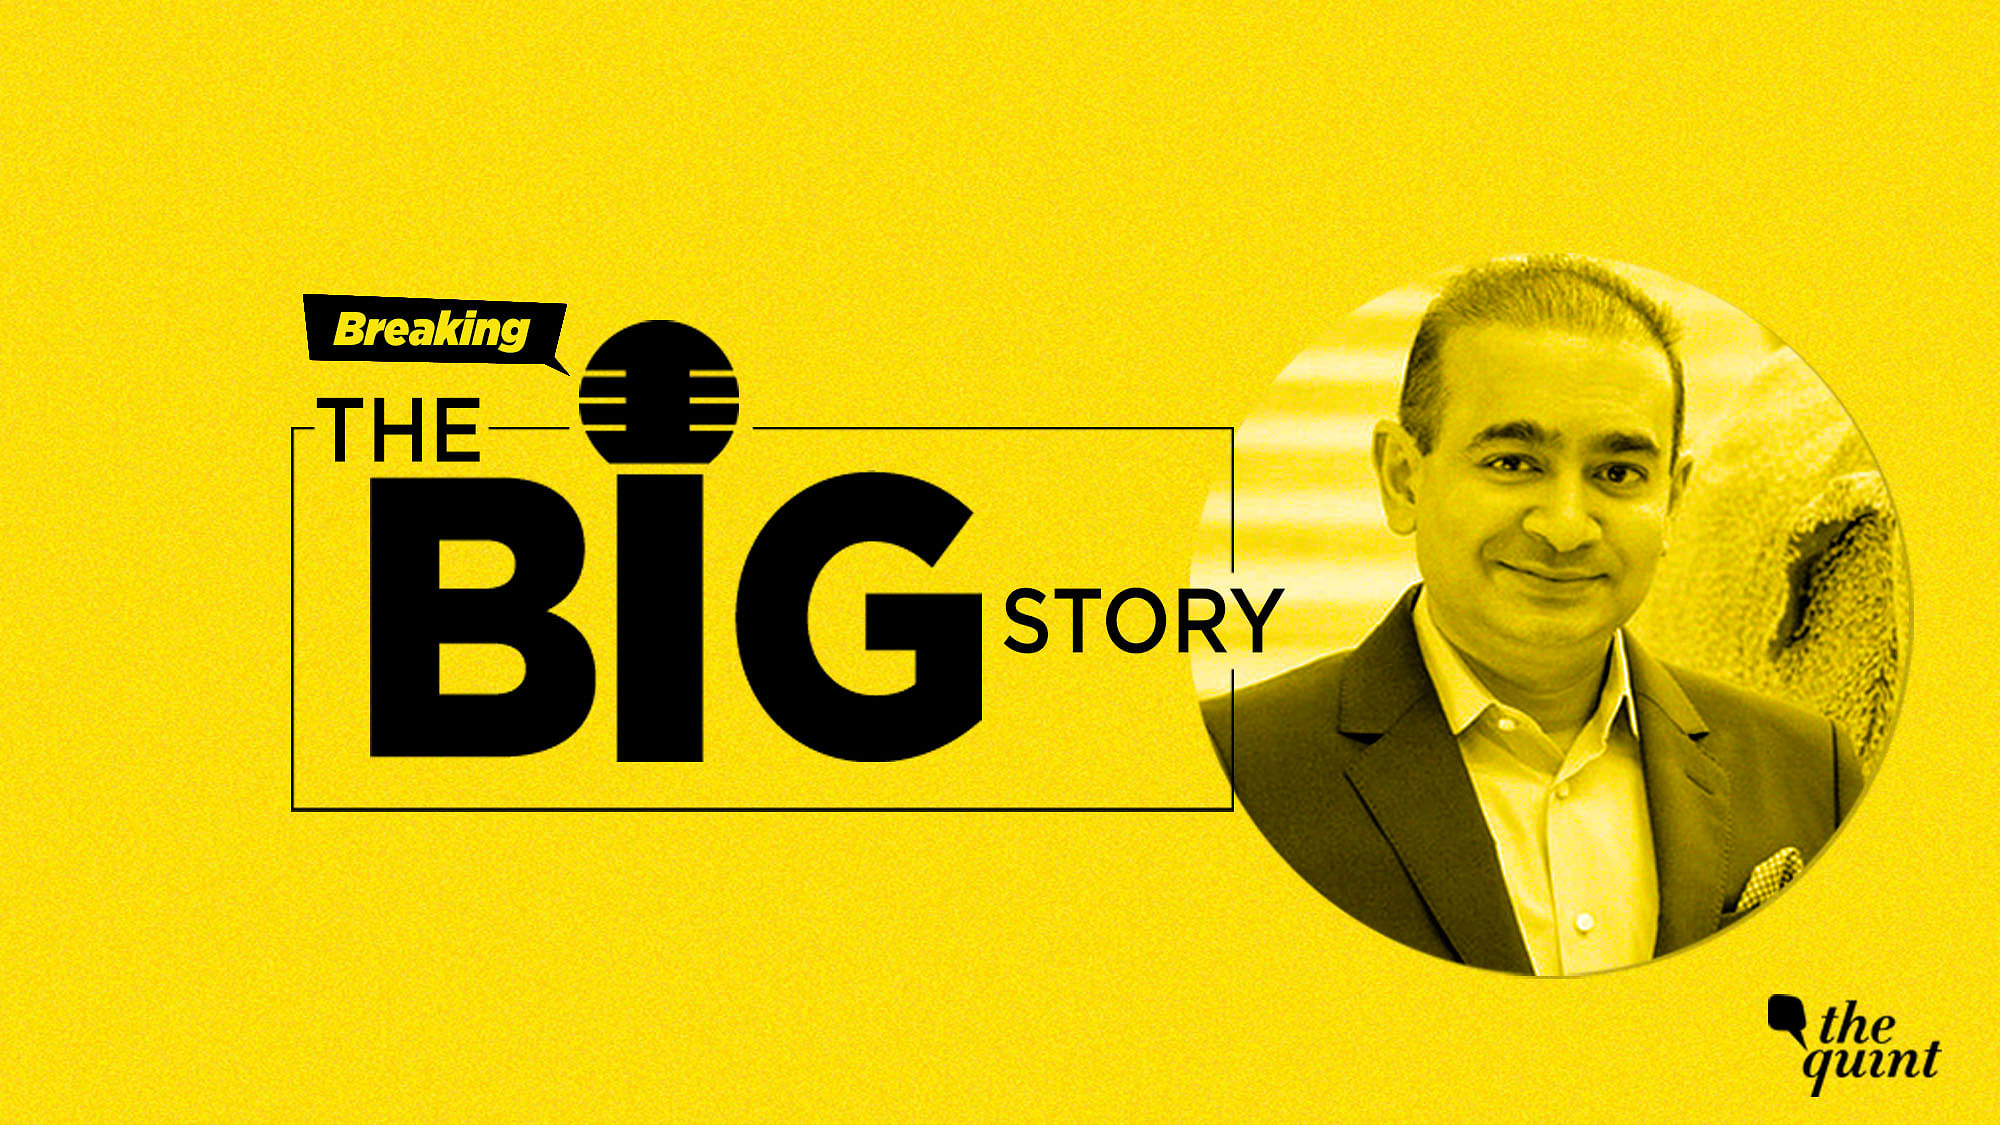 After diamond tycoon Nirav Modi’s arrest in London, what could happen next to the man who allegedly committed fraud to the tune of Rs. 11,300 crores.